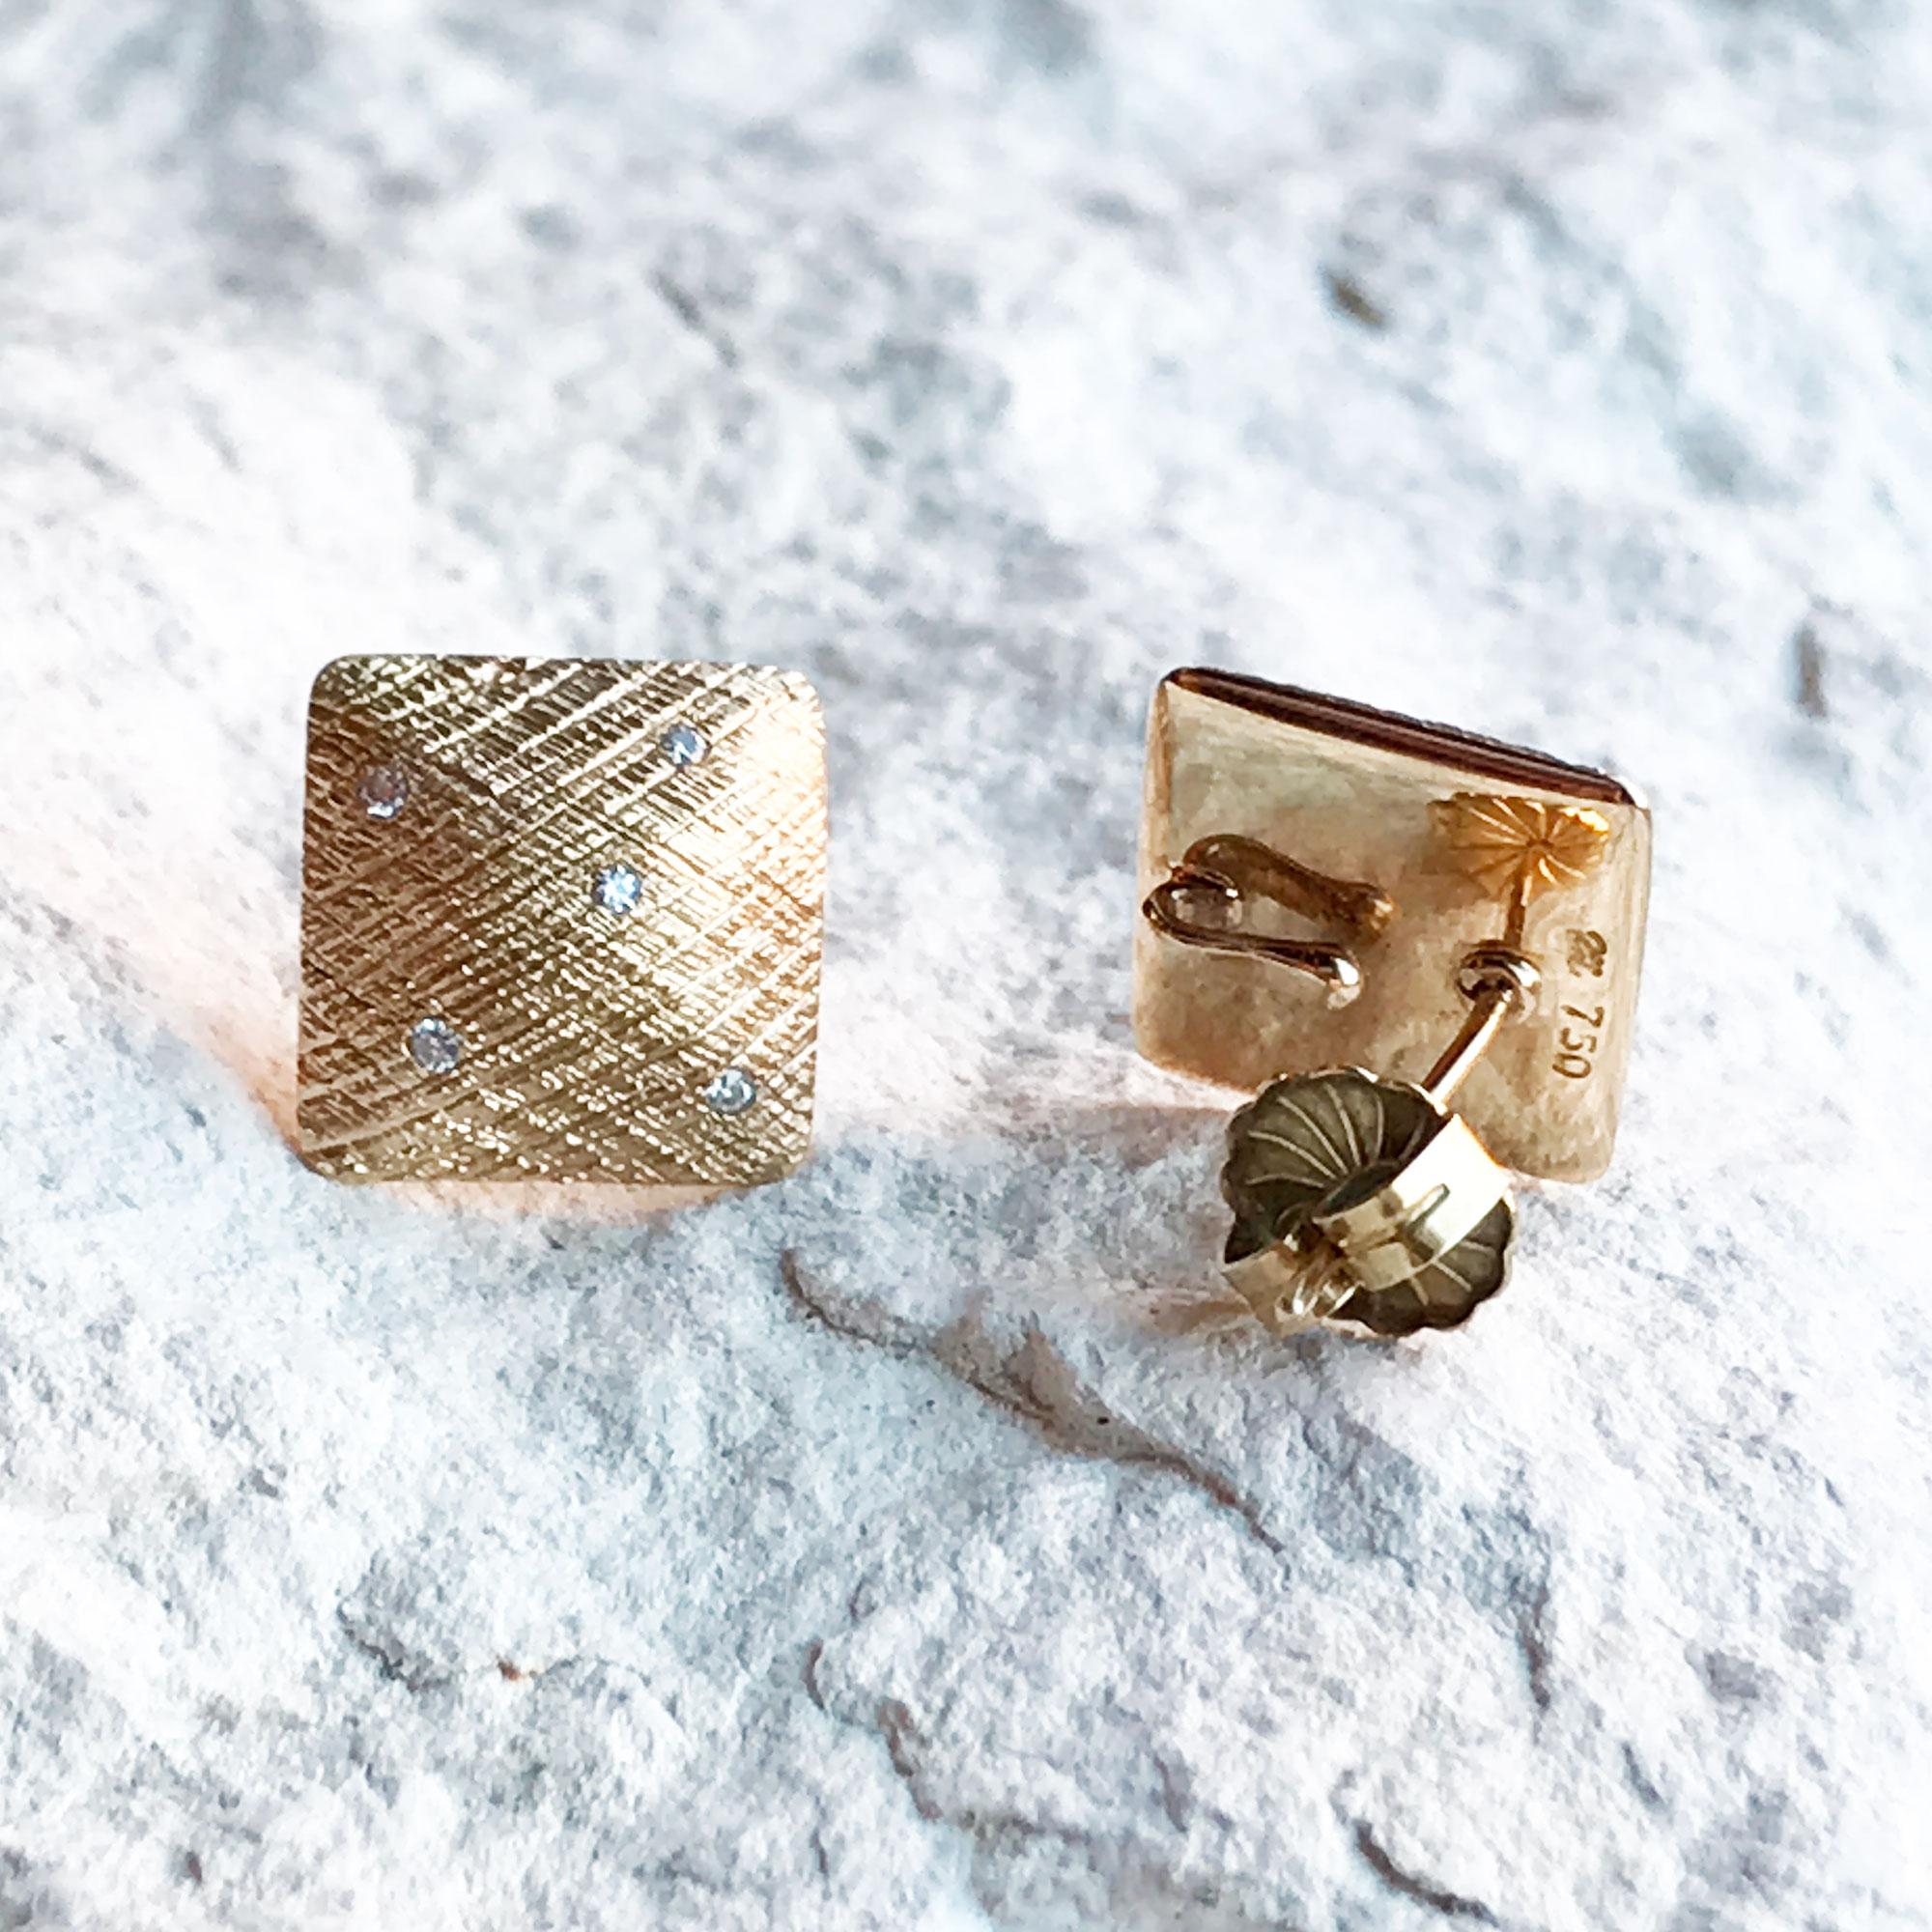 Uplift your look: Designed with diamonds on a background detailed with a hand-hammered crosshatch texture, the Spirit Gold Studs go with everything in your closet.

Diamond carat: 0.08